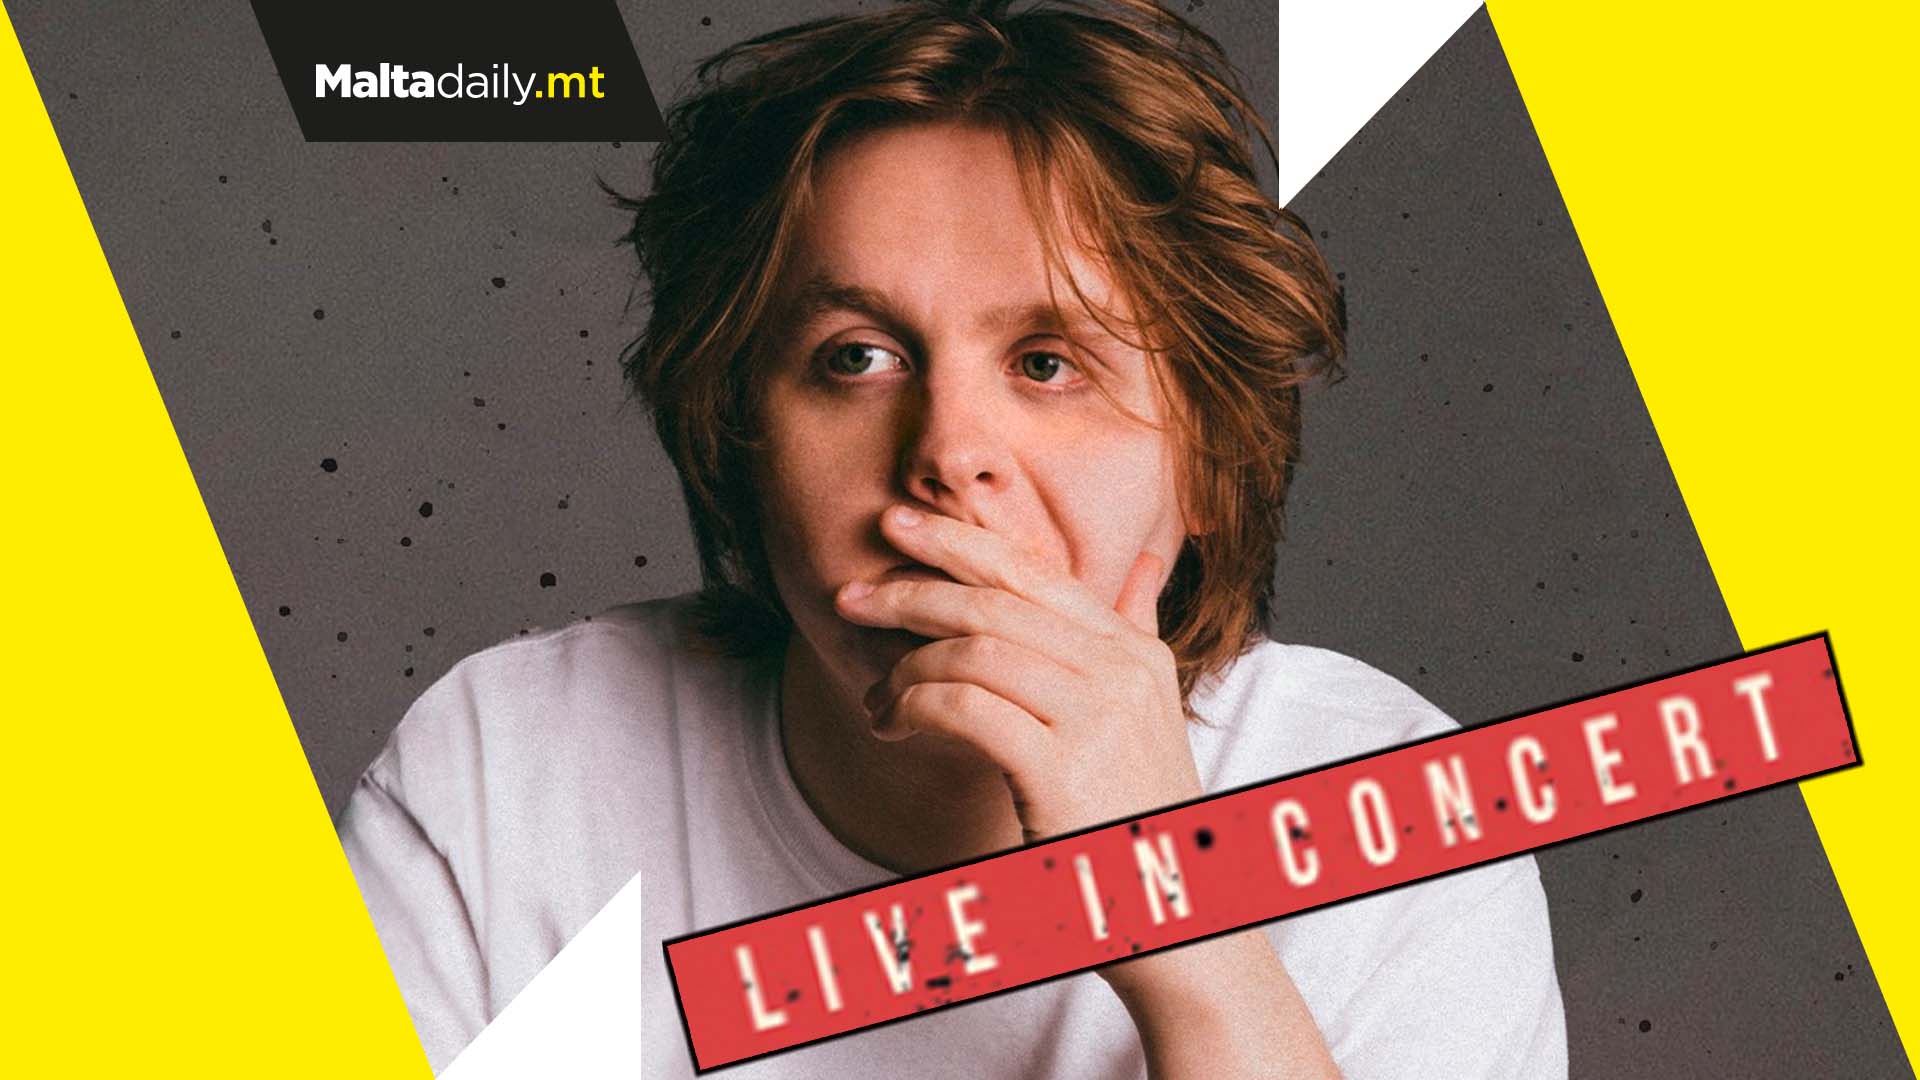 BREAKING: Lewis Capaldi coming to Malta on 2nd July